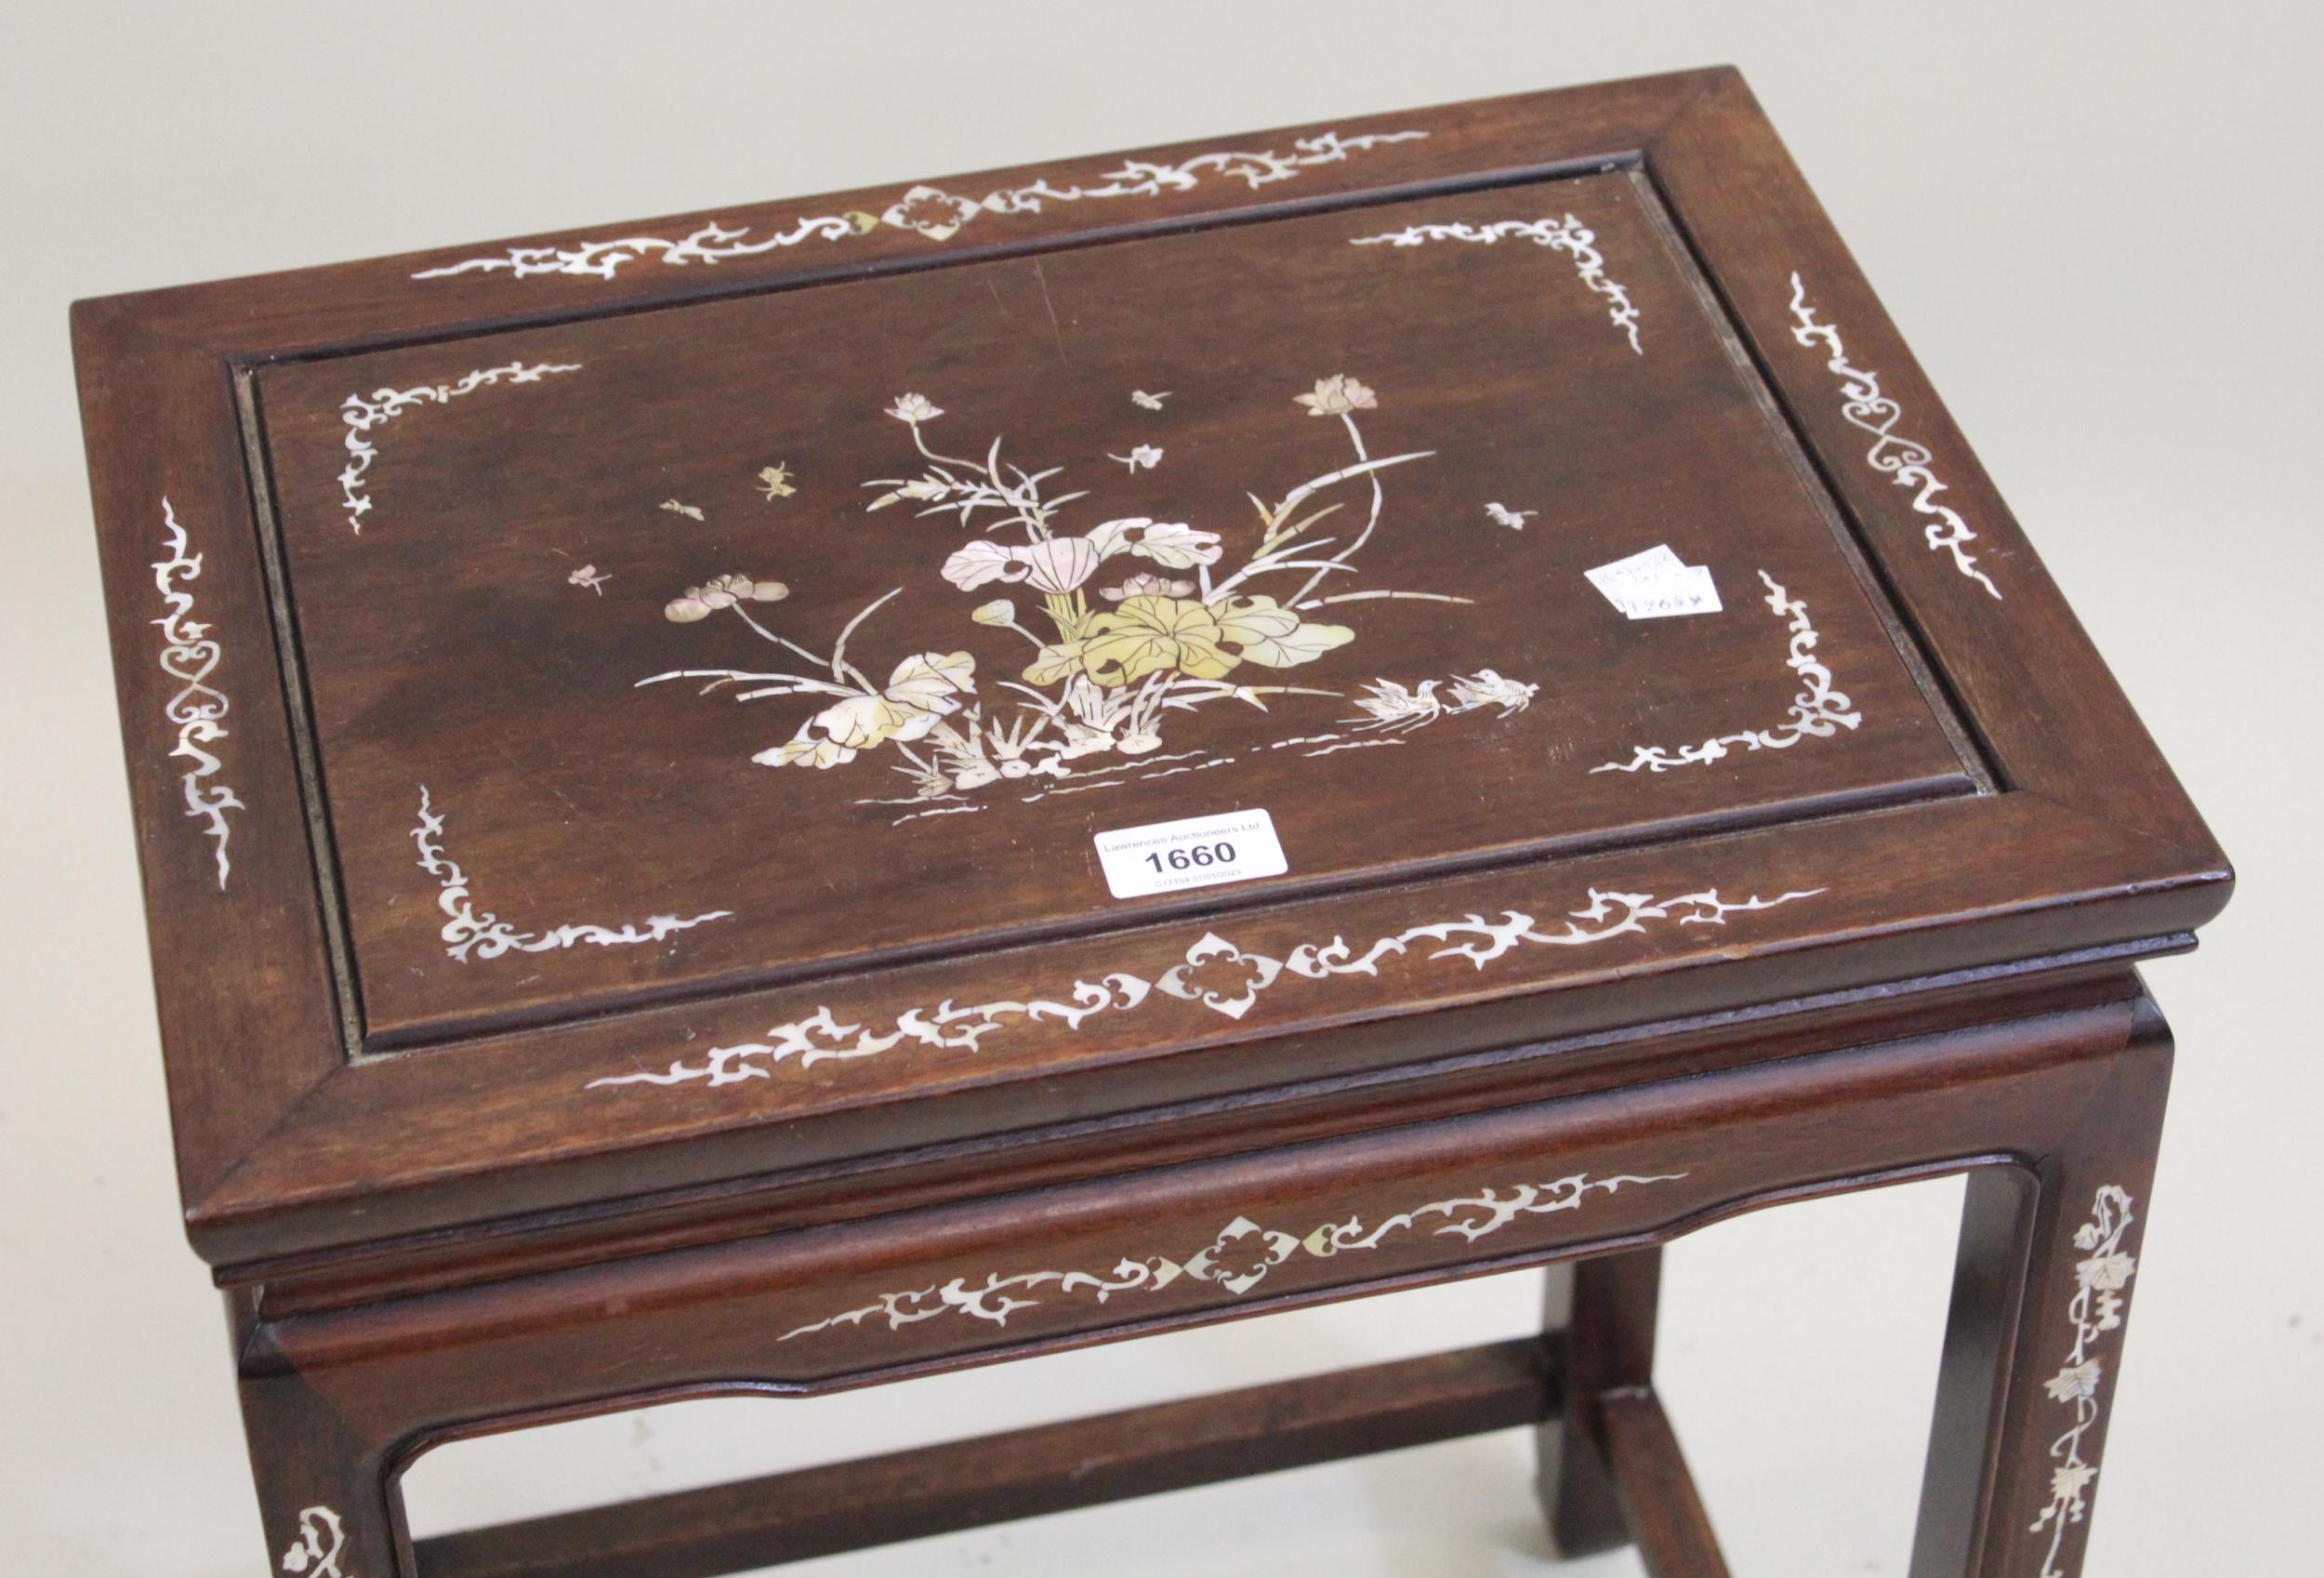 Chinese rectangular hardwood and mother of pearl inlaid occasional table, 43 x 33 x 56cms high - Image 2 of 2